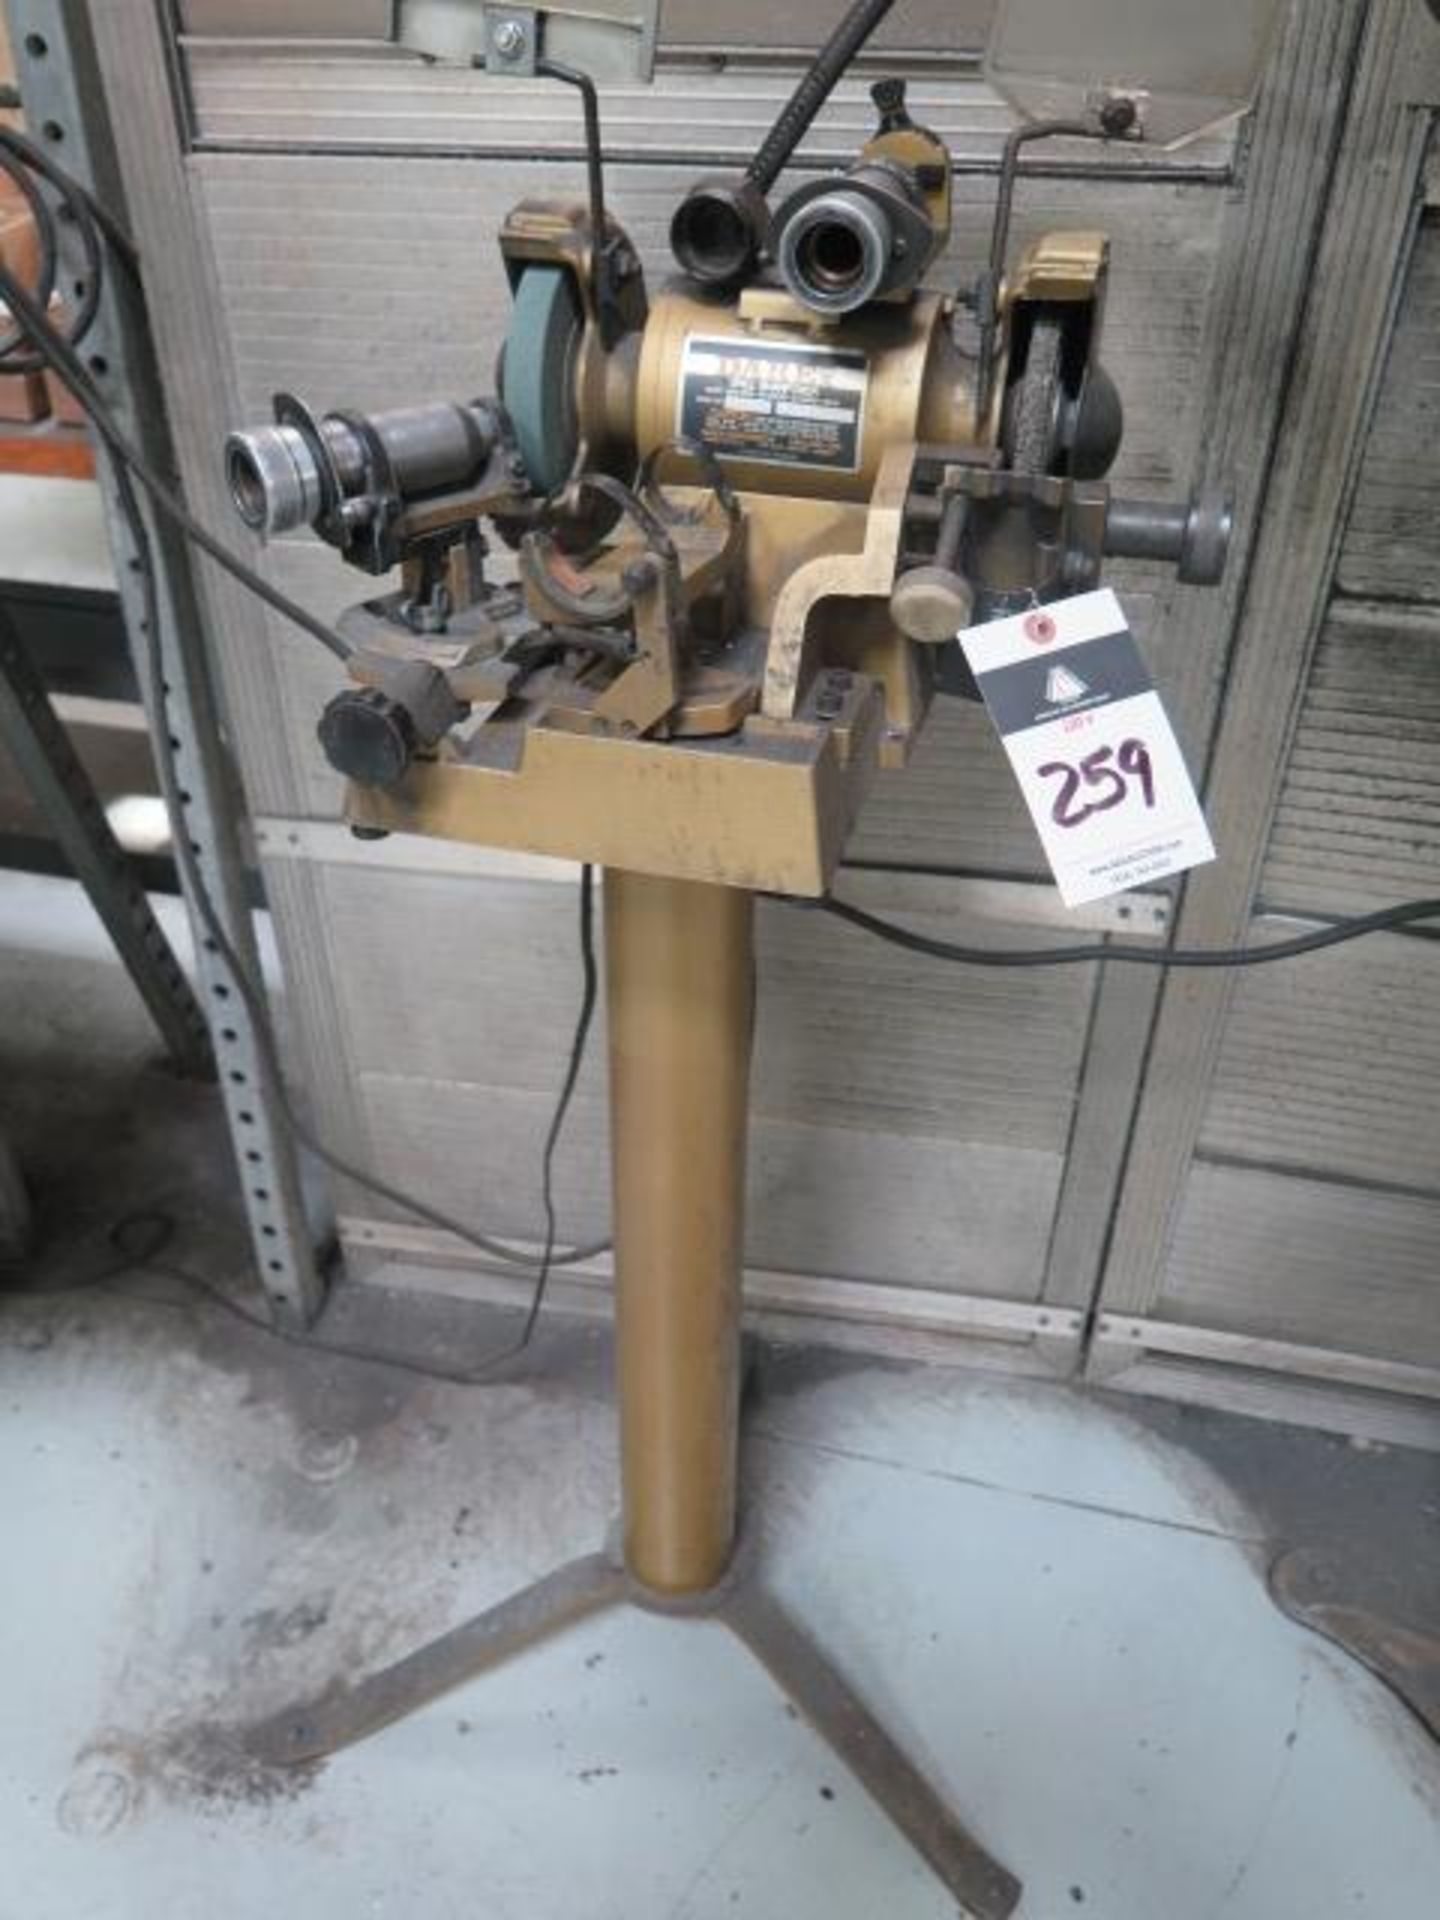 Darex Pedestal Drill Sharpener. This Item is Sold AS IS and with NO Warranty Applied.